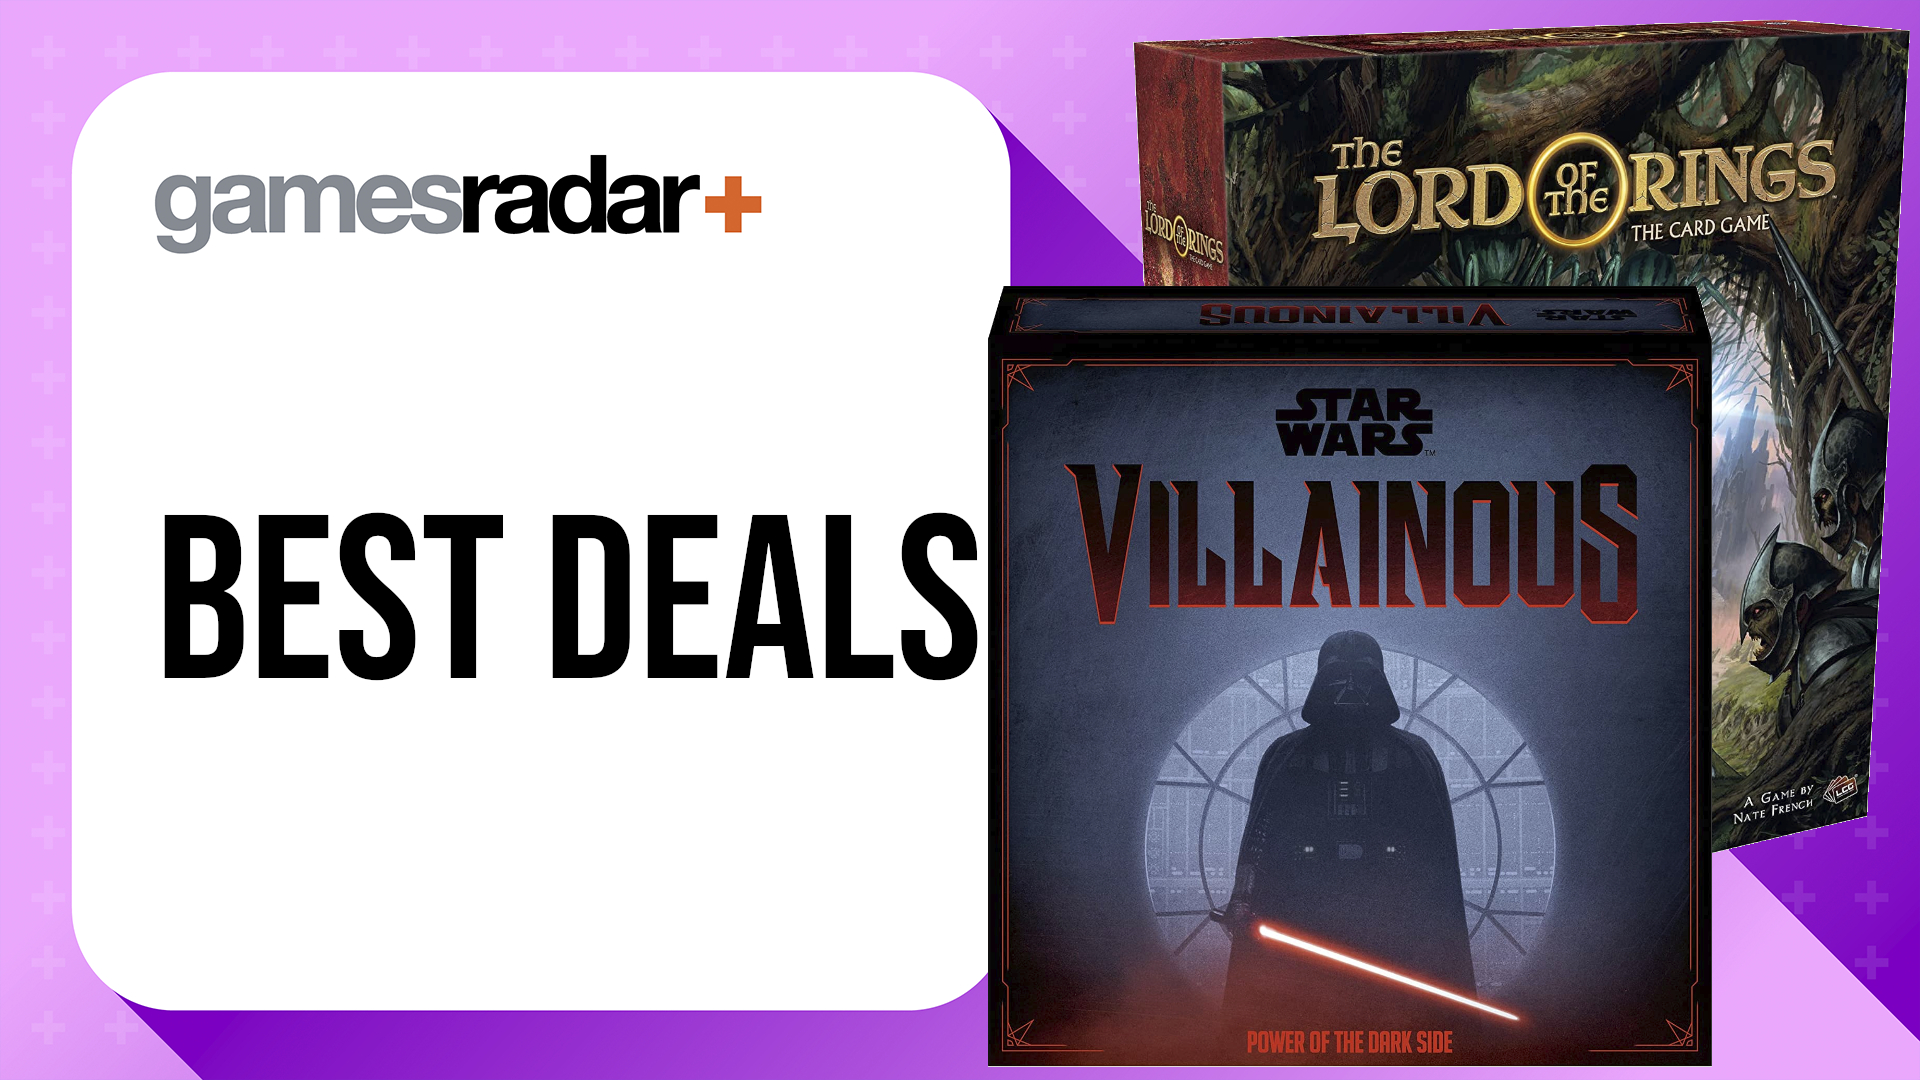 Black Friday board game deals with Star Wars Villainous and The Lord of the Rings card game